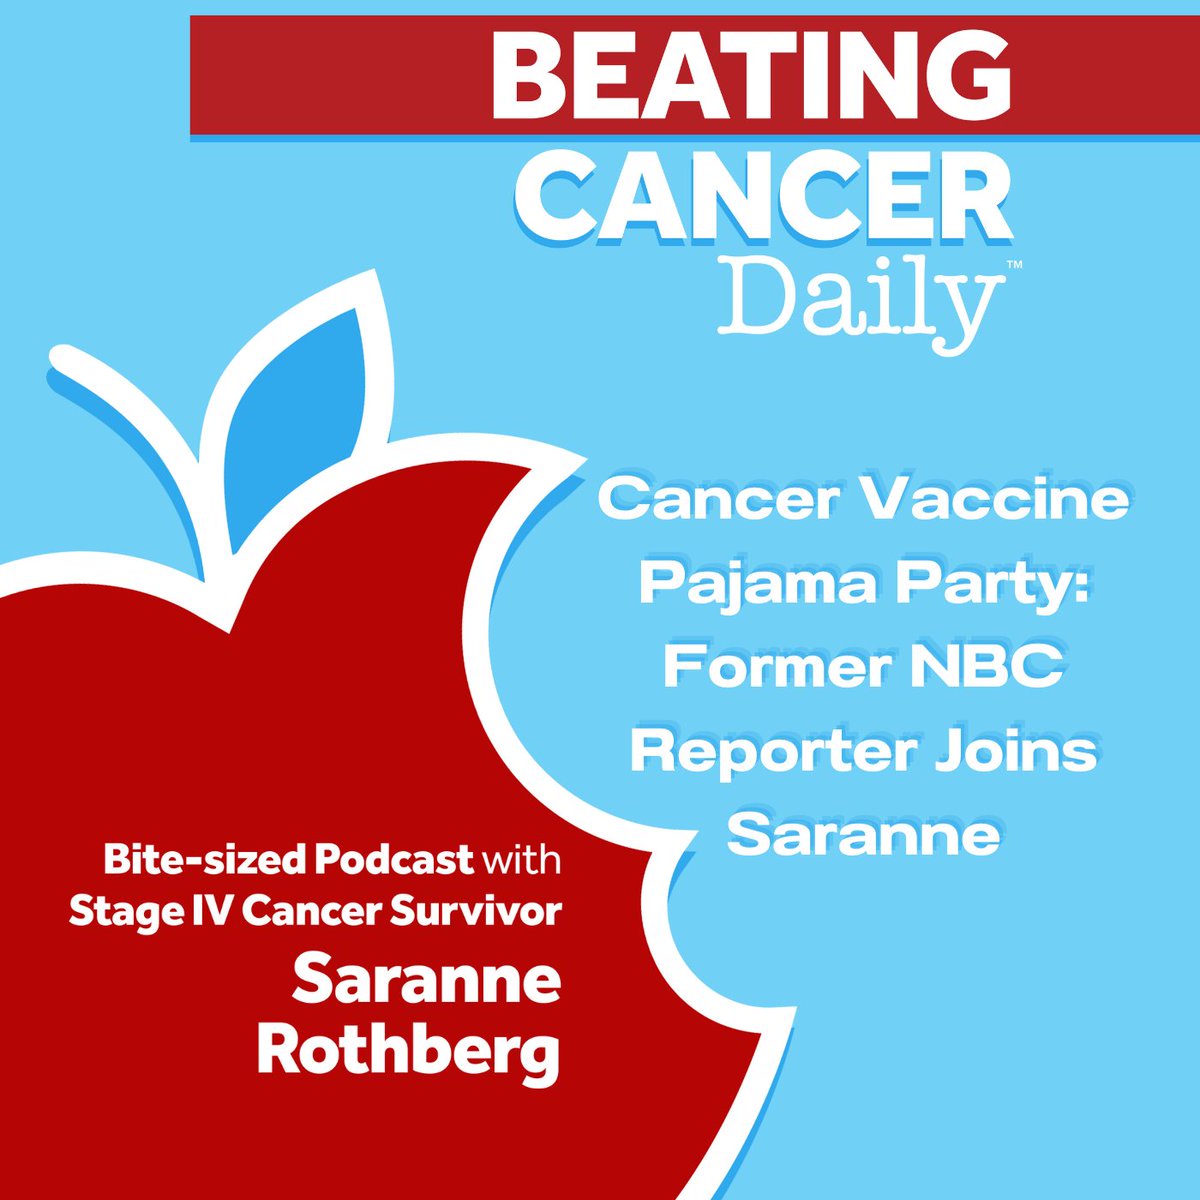 Today on #BeatingCancerDaily, Cancer Vaccine Pajama Party: Former NBC Reporter Joins Saranne
Listen wherever you listen to podcasts. 
ComedyCures.org   

#ComedyCures #ComedyCuresOrganization #AACR #AACR2024 #LaughDaily #InstaLaugh #DailyFunny #laughtherapy #laughmore